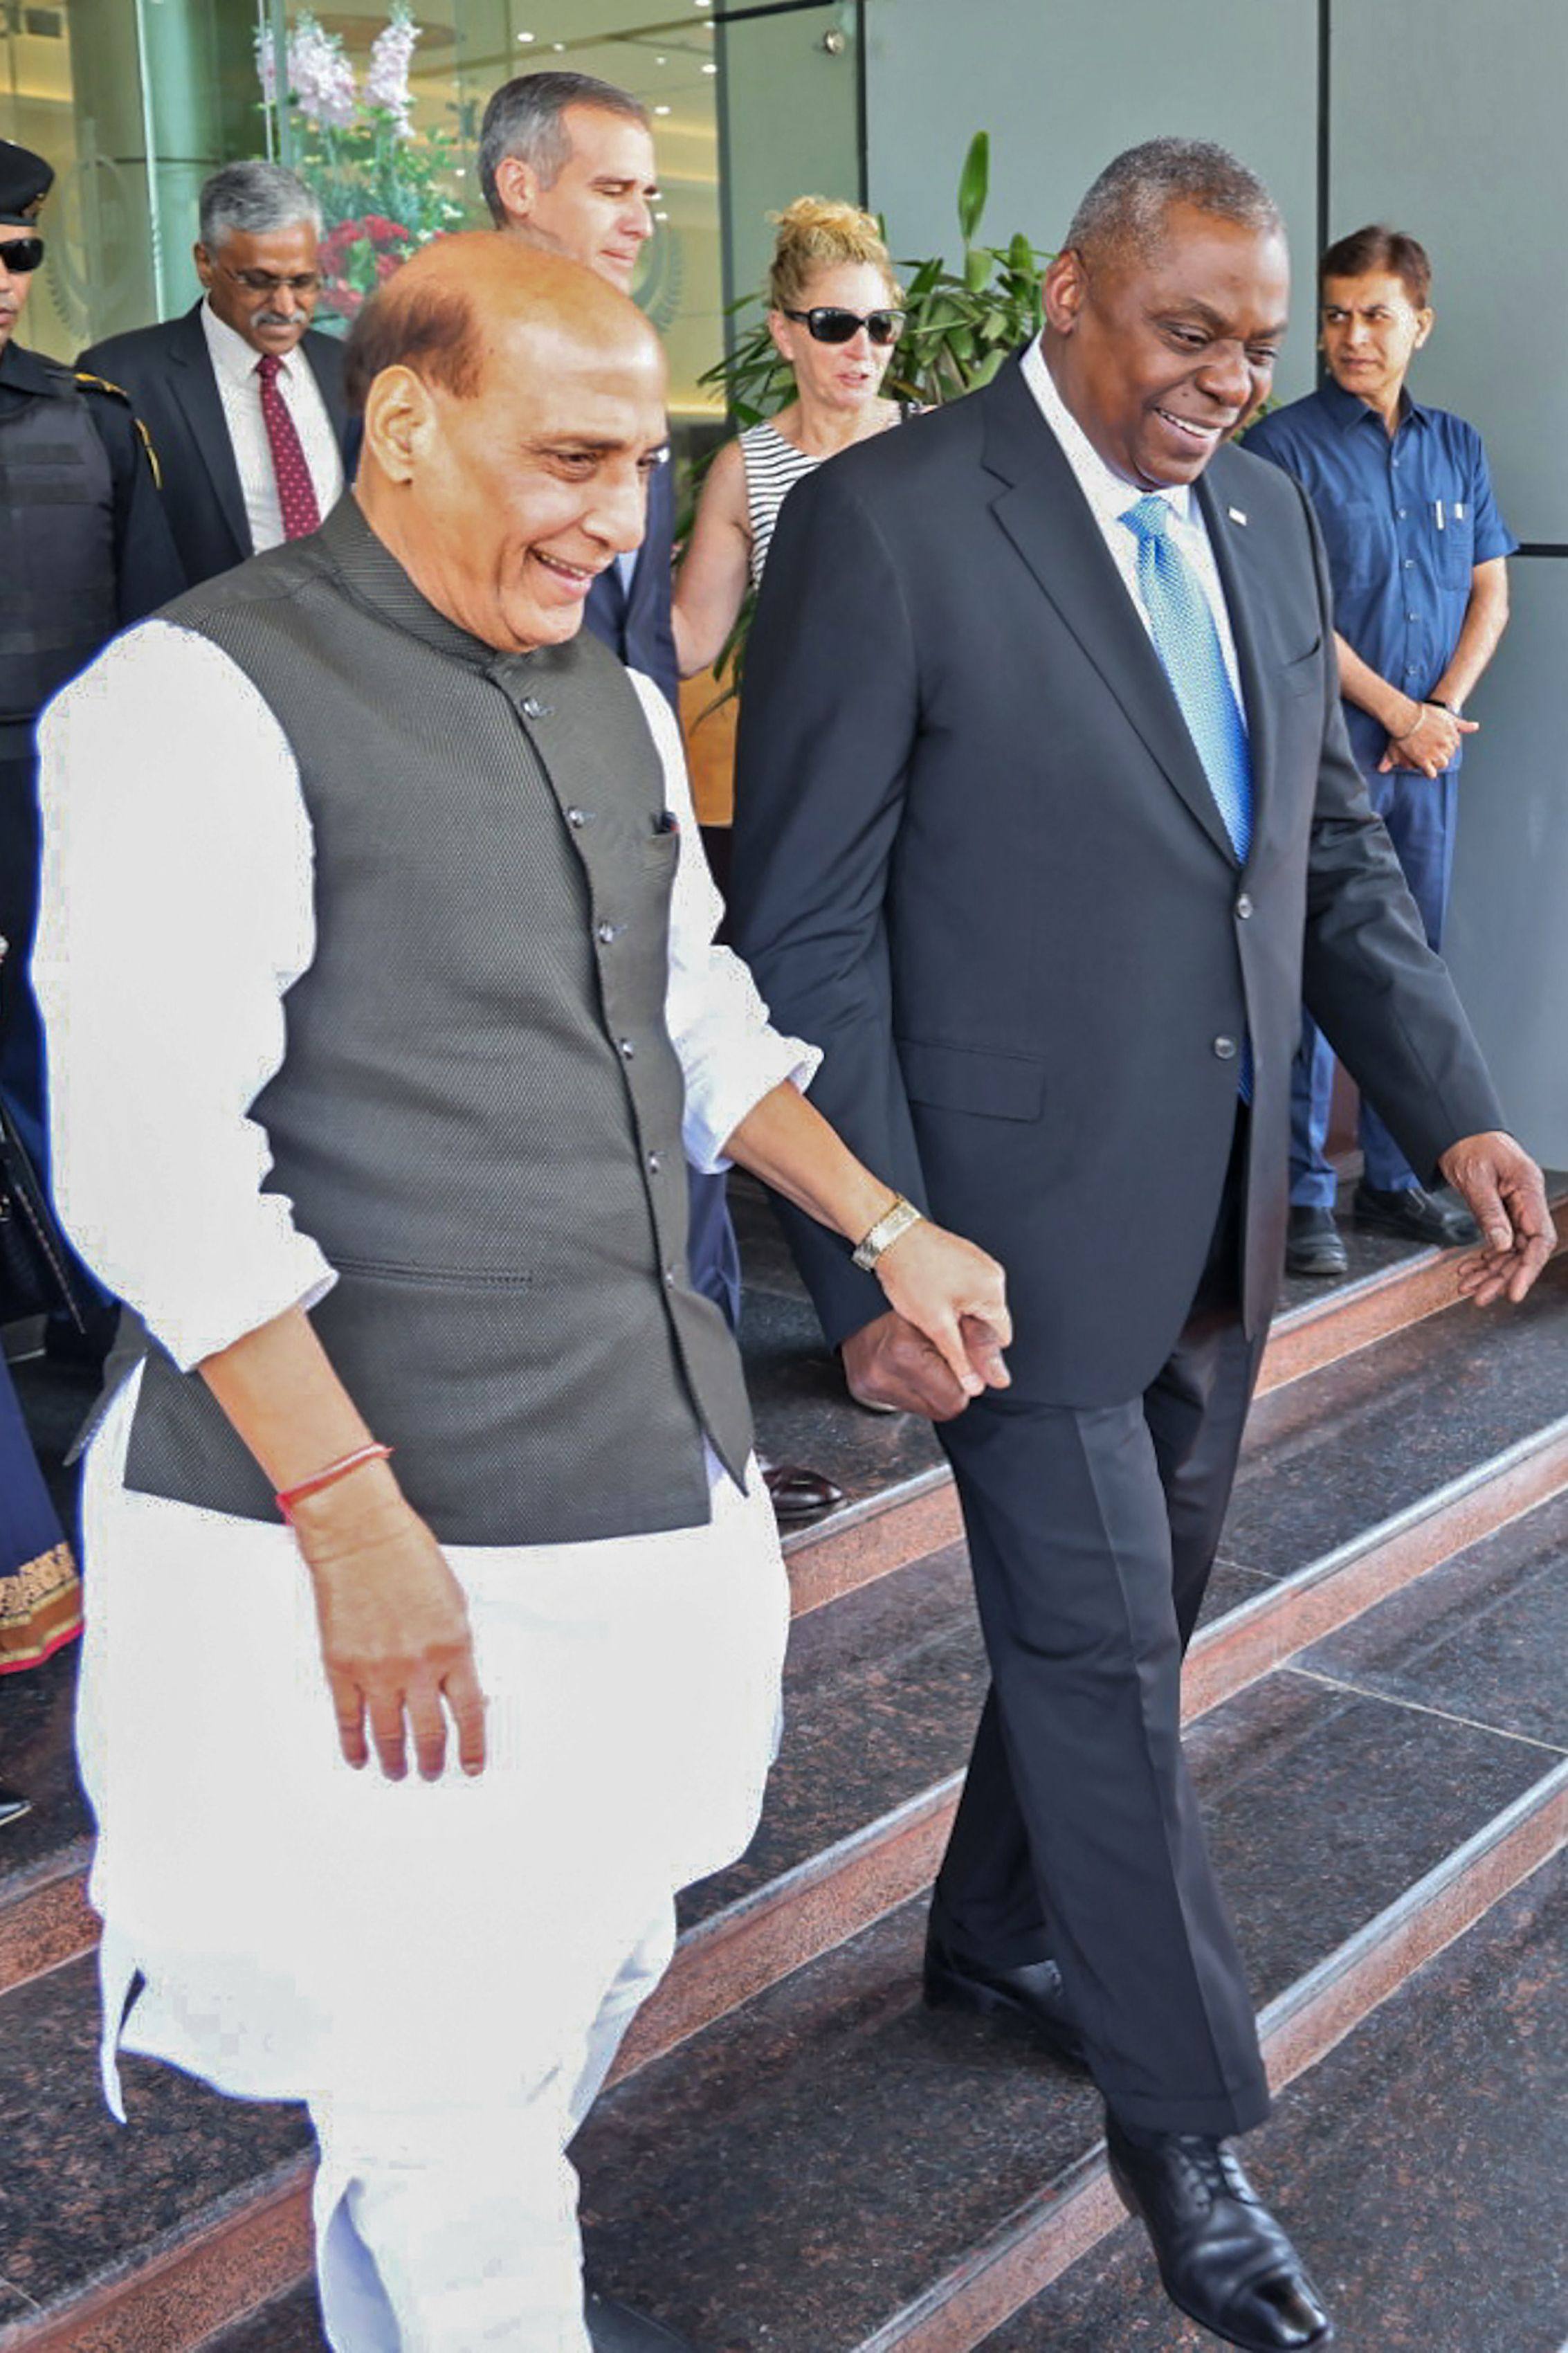 India’s Defence Minister Rajnath Singh (left) and US Secretary of Defence Lloyd Austin after their meeting in Delhi on June 5. Photo: Indian Ministry of Defence via AFP